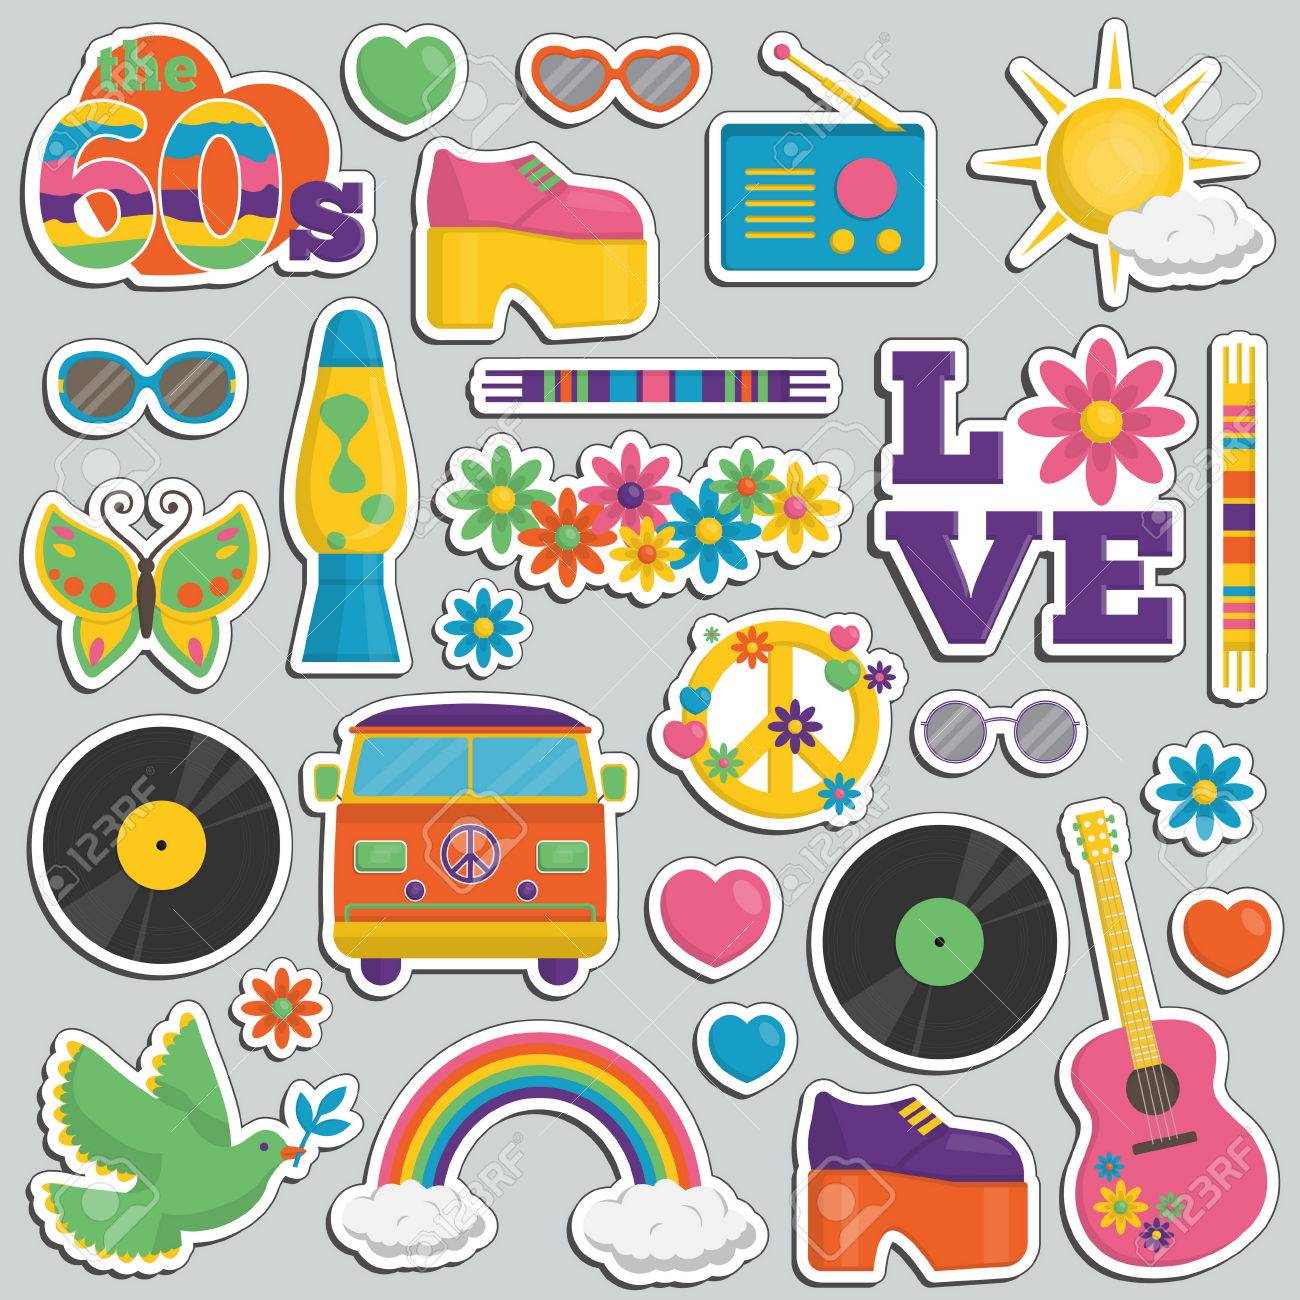 Free vector royalty free 60s png files, Free CLip Art.